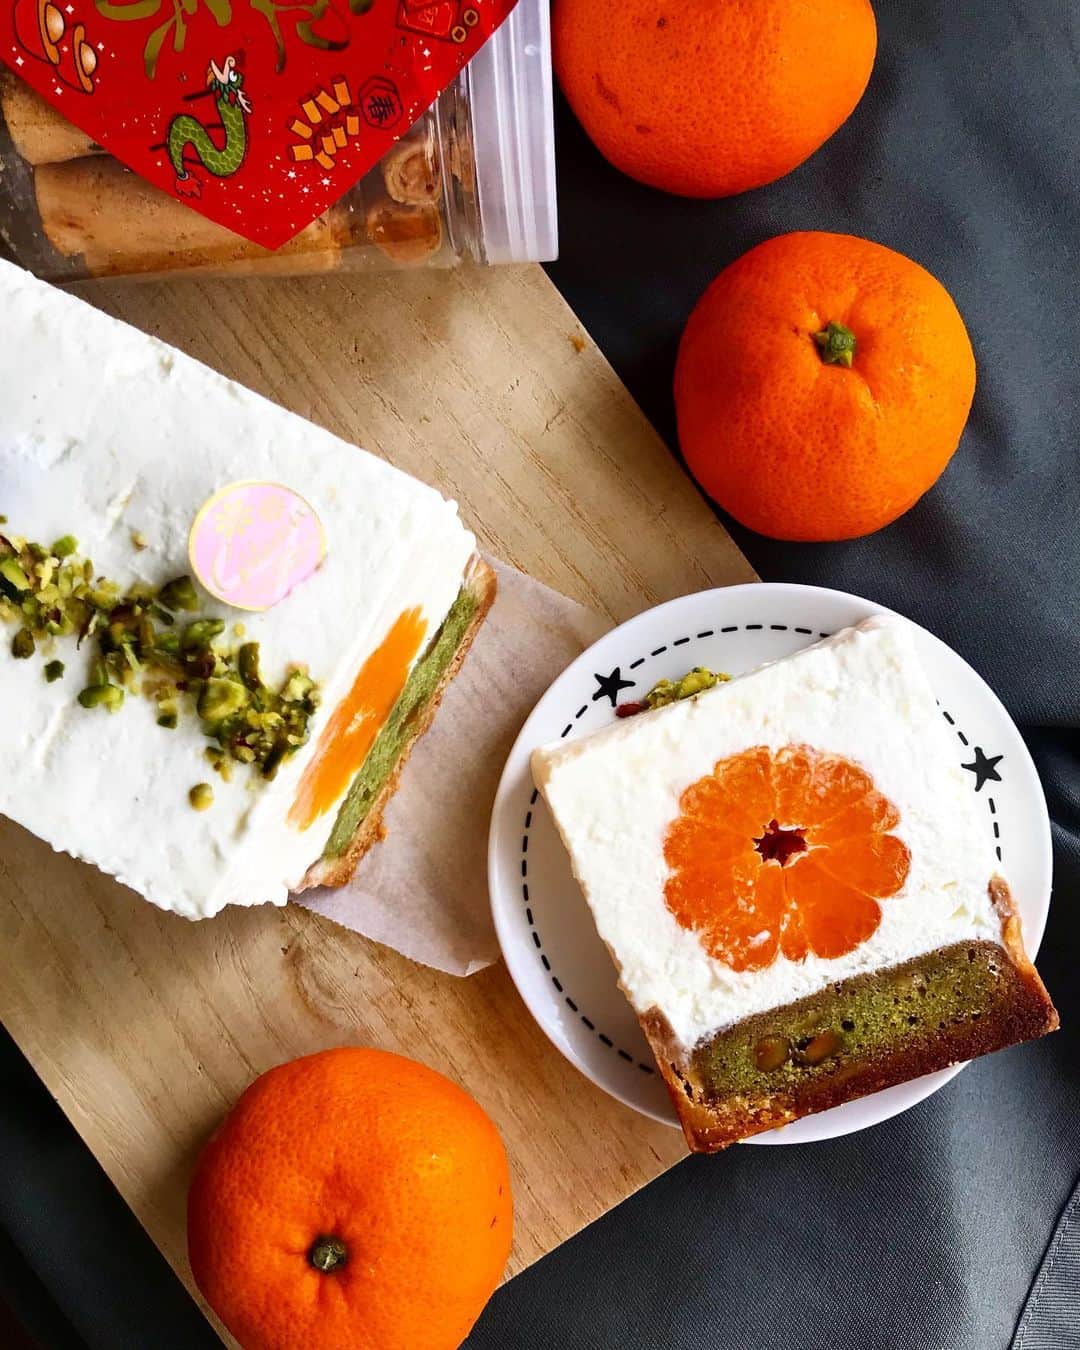 Li Tian の雑貨屋さんのインスタグラム写真 - (Li Tian の雑貨屋Instagram)「CNY SPECIAL 🧧 — Prosperity Gold Bar 🍊 Tangy Yoghurt Fromage Cheese, Japanese Mikans, Pisatchio Almond Tart Filling, Pate Sable Base   Preorders now open for the dates below. Kindly DM to order. As usual, full payment is required to confirm the order. Thank you.   Price: $45/ whole tart (serves 5-6)  Shell Life : 3 days  Collection Timings:  Feb 6 (Sat) 3-5pm FULL  Feb 11 除夕(Thu) 12-3pm FULL  Feb 13 初二 (Sat) 3-5pm LAST SLOT  Feb 14 初三 (Sun) 3-5pm  Collection Point: 5min walk from Tiong Bahru MRT (or you may wish to arrange your own delivery)  Payment mode: Google Pay (Enjoy $3 immediate cashback to your bank account for first-time Google Pay users using my referral code bm5yj2b) OR Paynow/PayLah OR bank transfer   #dairycreamkitchen #singapore #desserts #igersjp #yummy #love #sgfood #foodporn #igsg #ケーキ  #instafood #beautifulcuisines #sgbakes #bonappetit #cafe #cakes #bake #sgcakes #スイーツ #feedfeed #pastry #sgcafe #cake #homebaker #stayhomesg #homebake #pistachio #tarts #orange #cheesecake」1月30日 11時54分 - dairyandcream